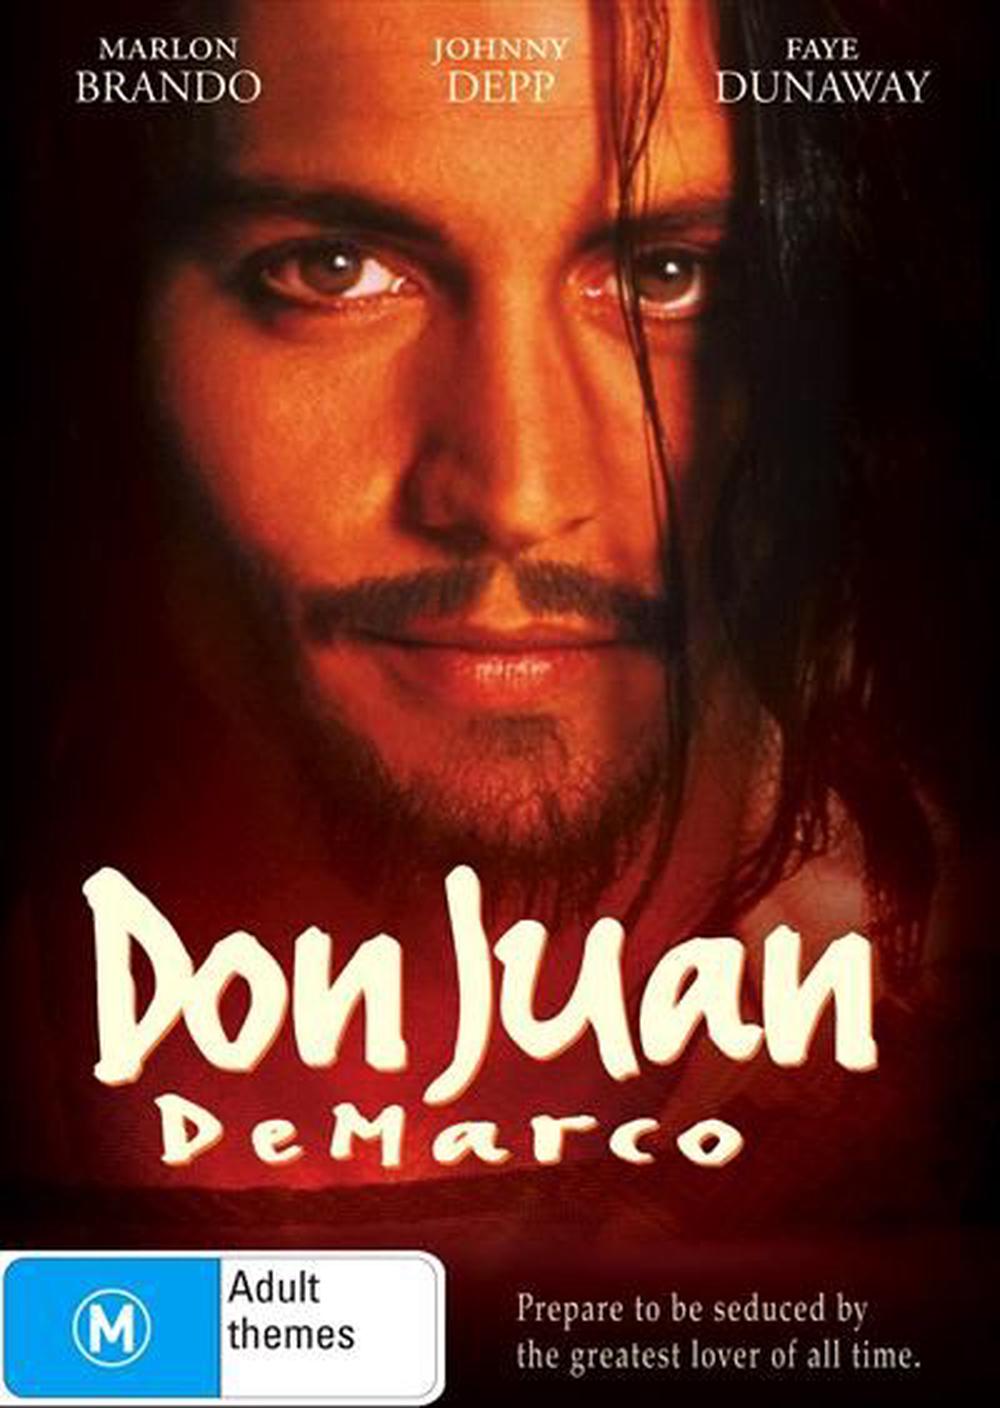 the tales of don juan